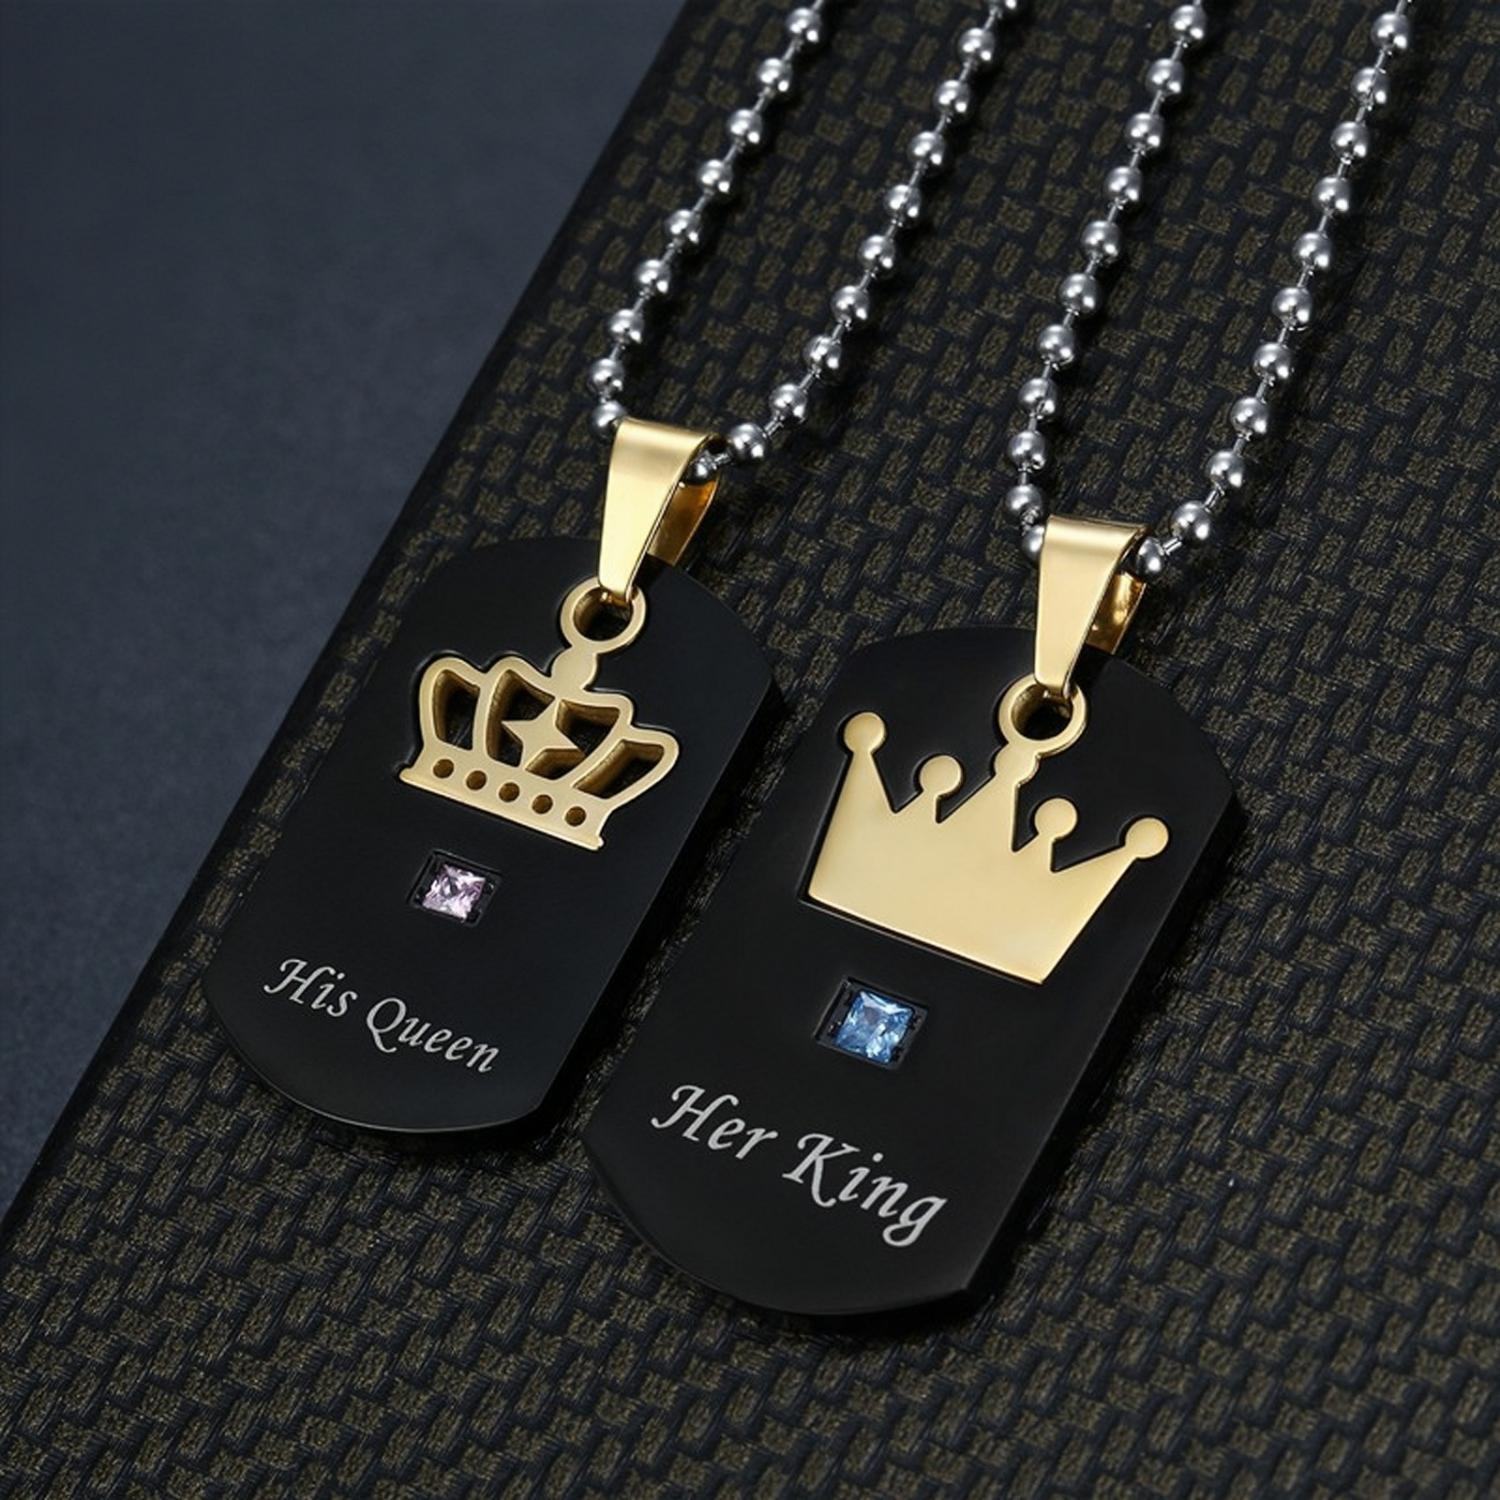 Engravable Her King His Queen Necklace For Couples In Titanium - CoupleSets